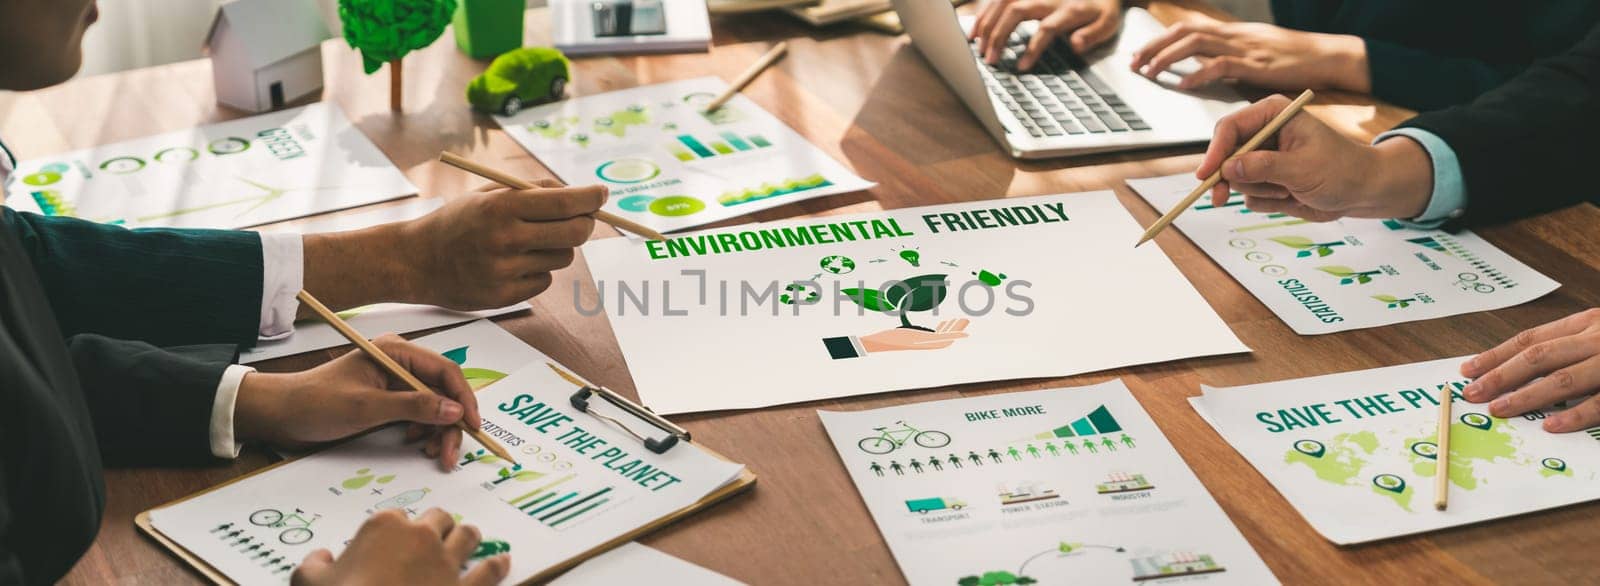 Eco business company meeting with group of business people planning strategy and discuss marketing of eco-friendly and renewable clean energy products. Green business company concept. Trailblazing